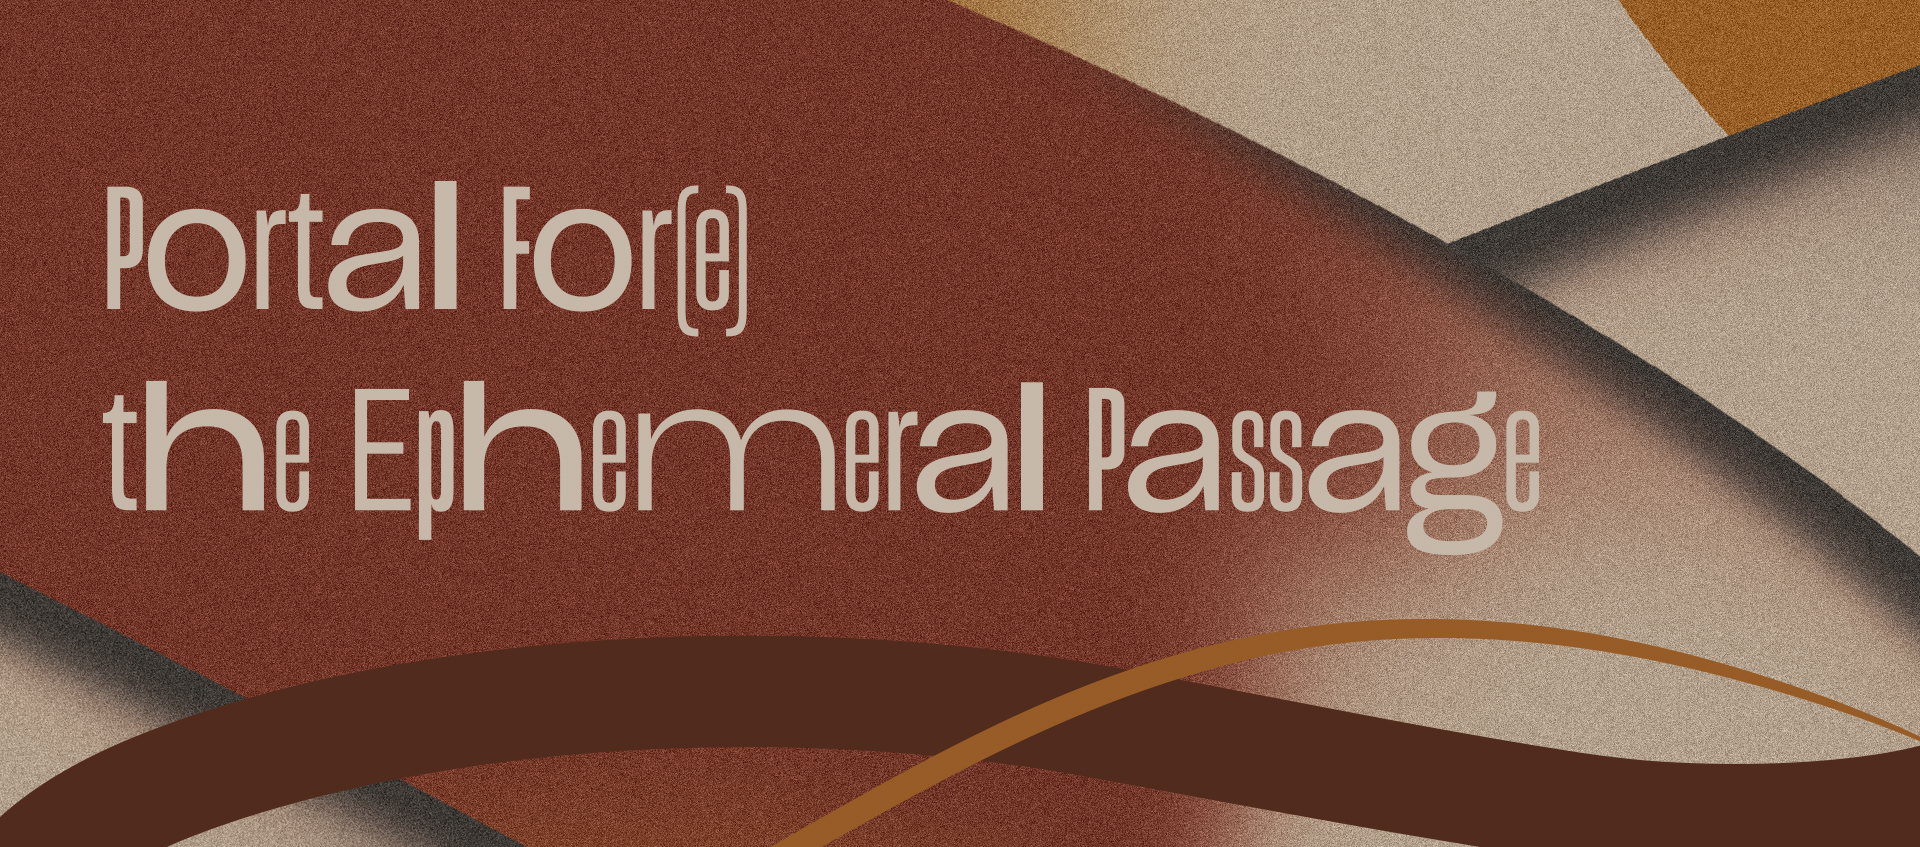 A graphic with curved shapes in brown tones over which is the text "Portal For(e) the Ephemeral Passage"